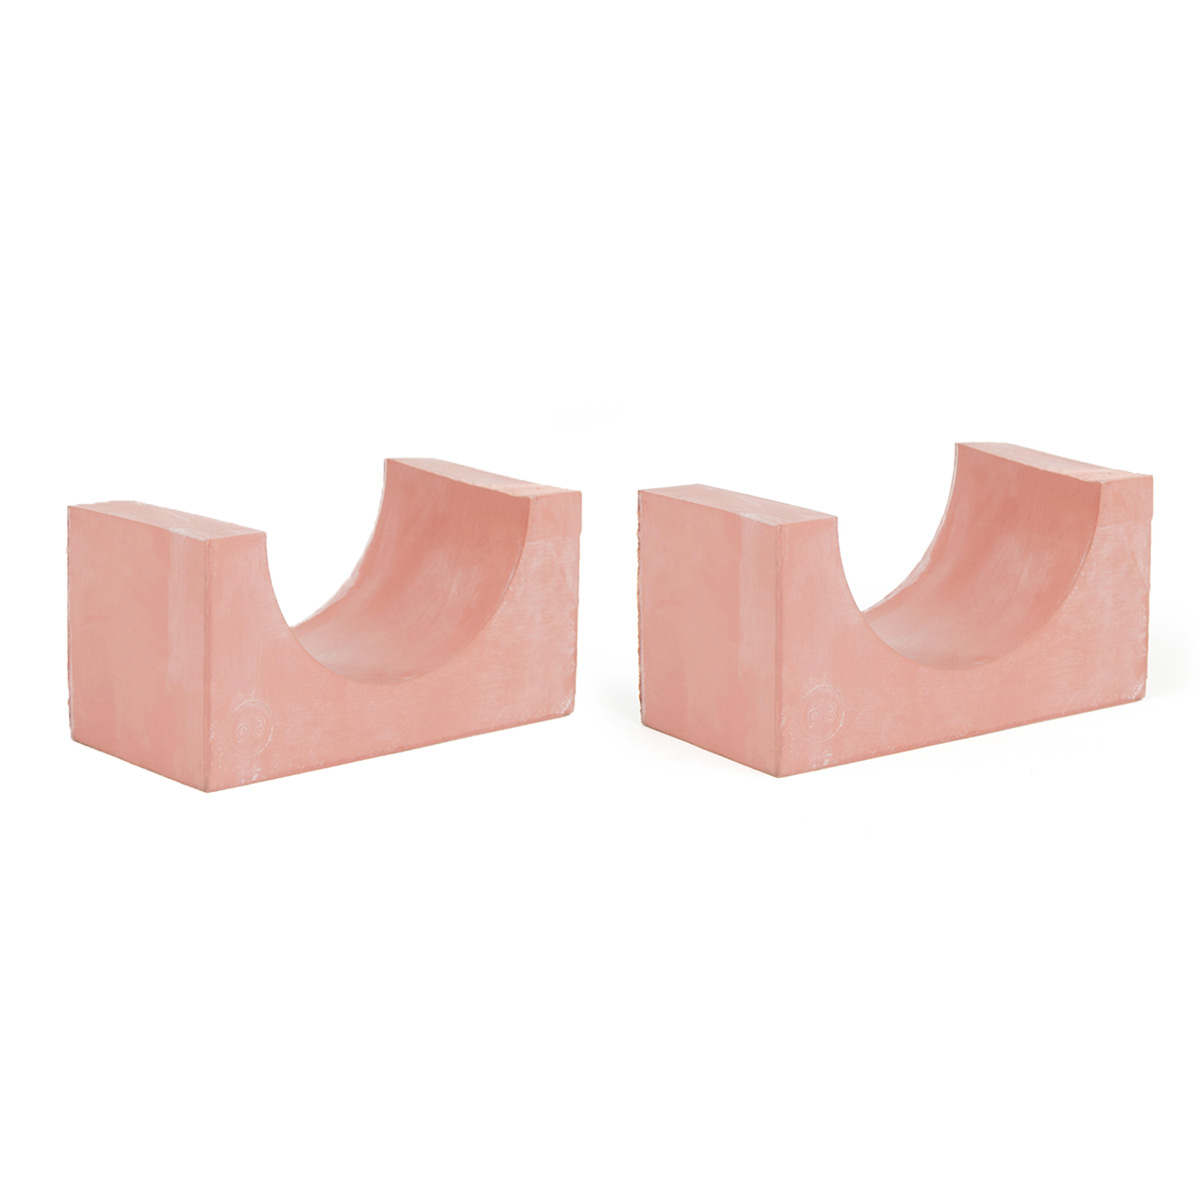 120-86*2 Set of 2 half insert block lycron, 120-86 for cable/pipe diam. 85.5-87.5mm